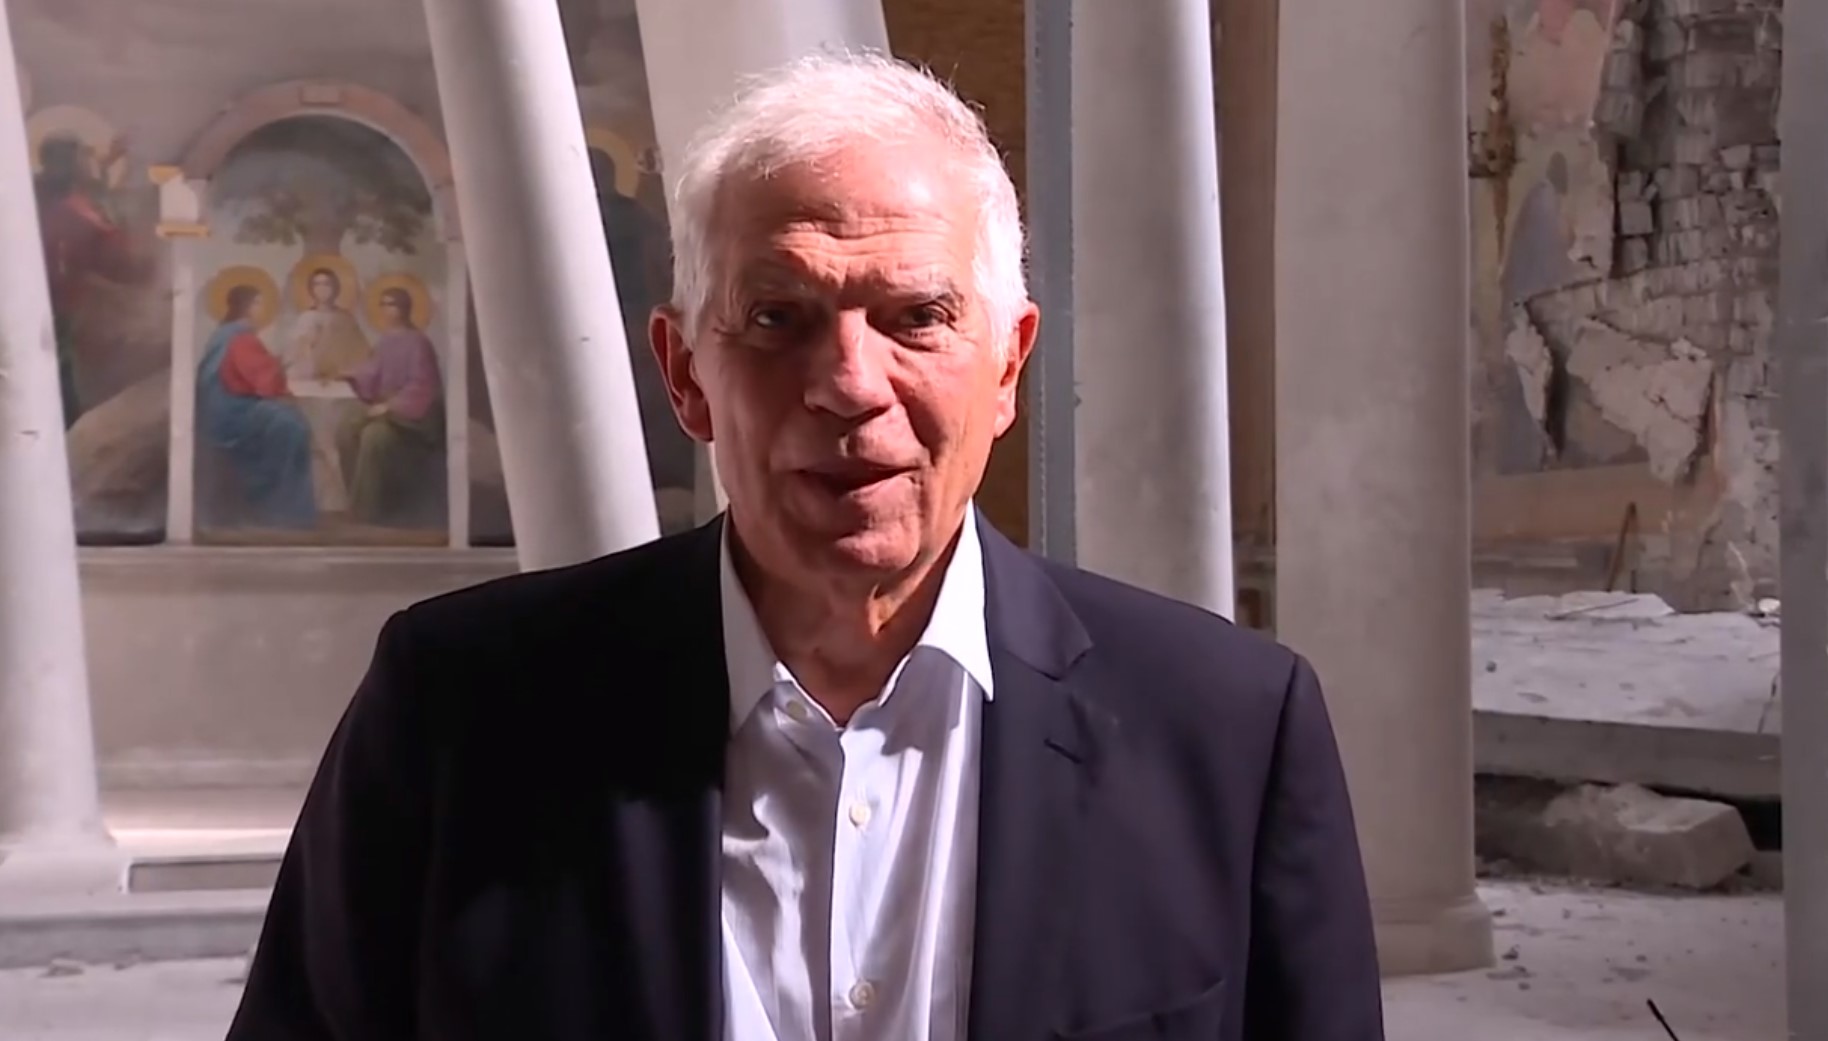 Josep Borrell arrived in Odessa and recorded a video from a church destroyed by Russians